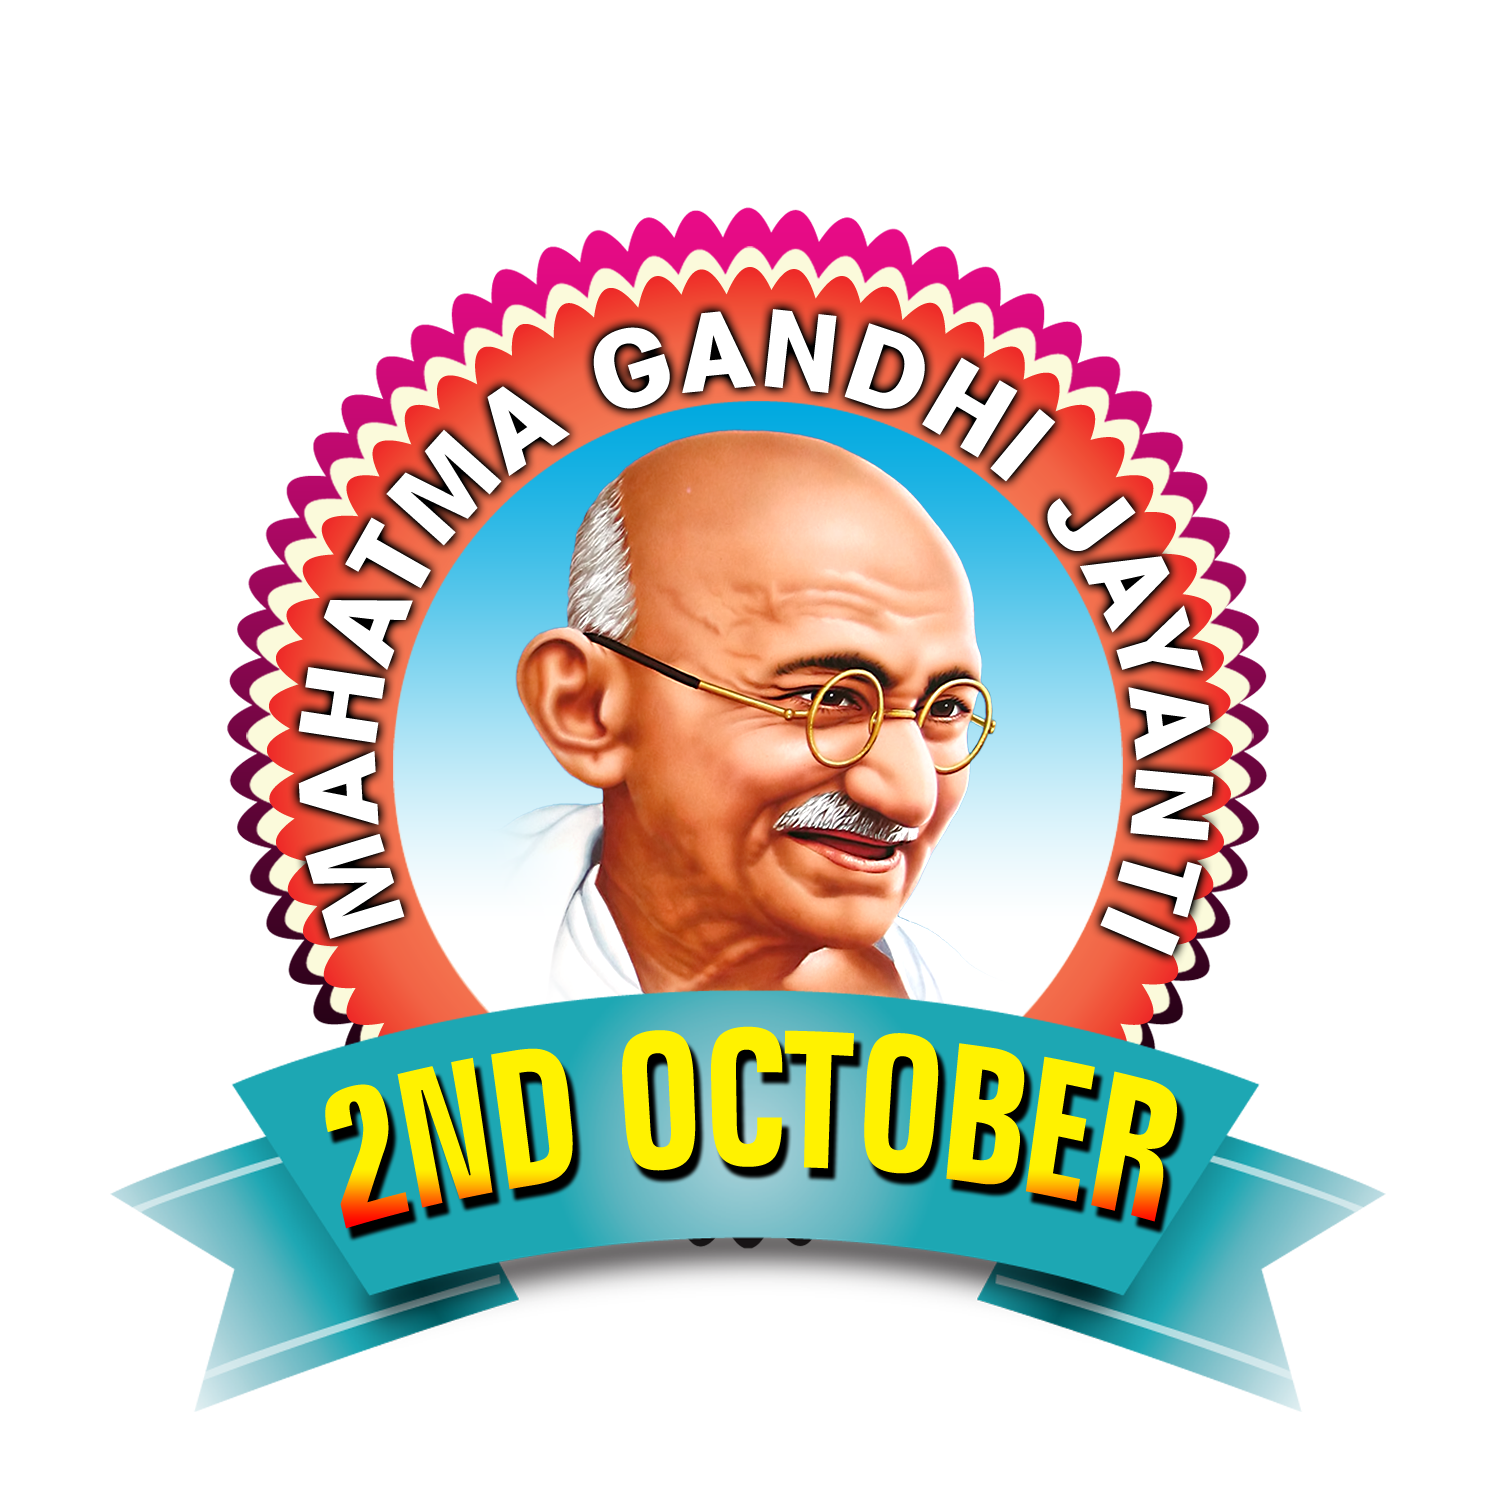 Happy Gandhi Jayanti October 2 Images, HD Pictures, Wallpapers, 4K Photos,  High-Quality Photographs, And High-Resolution Images For WhatsApp,  Facebook, And Instagram